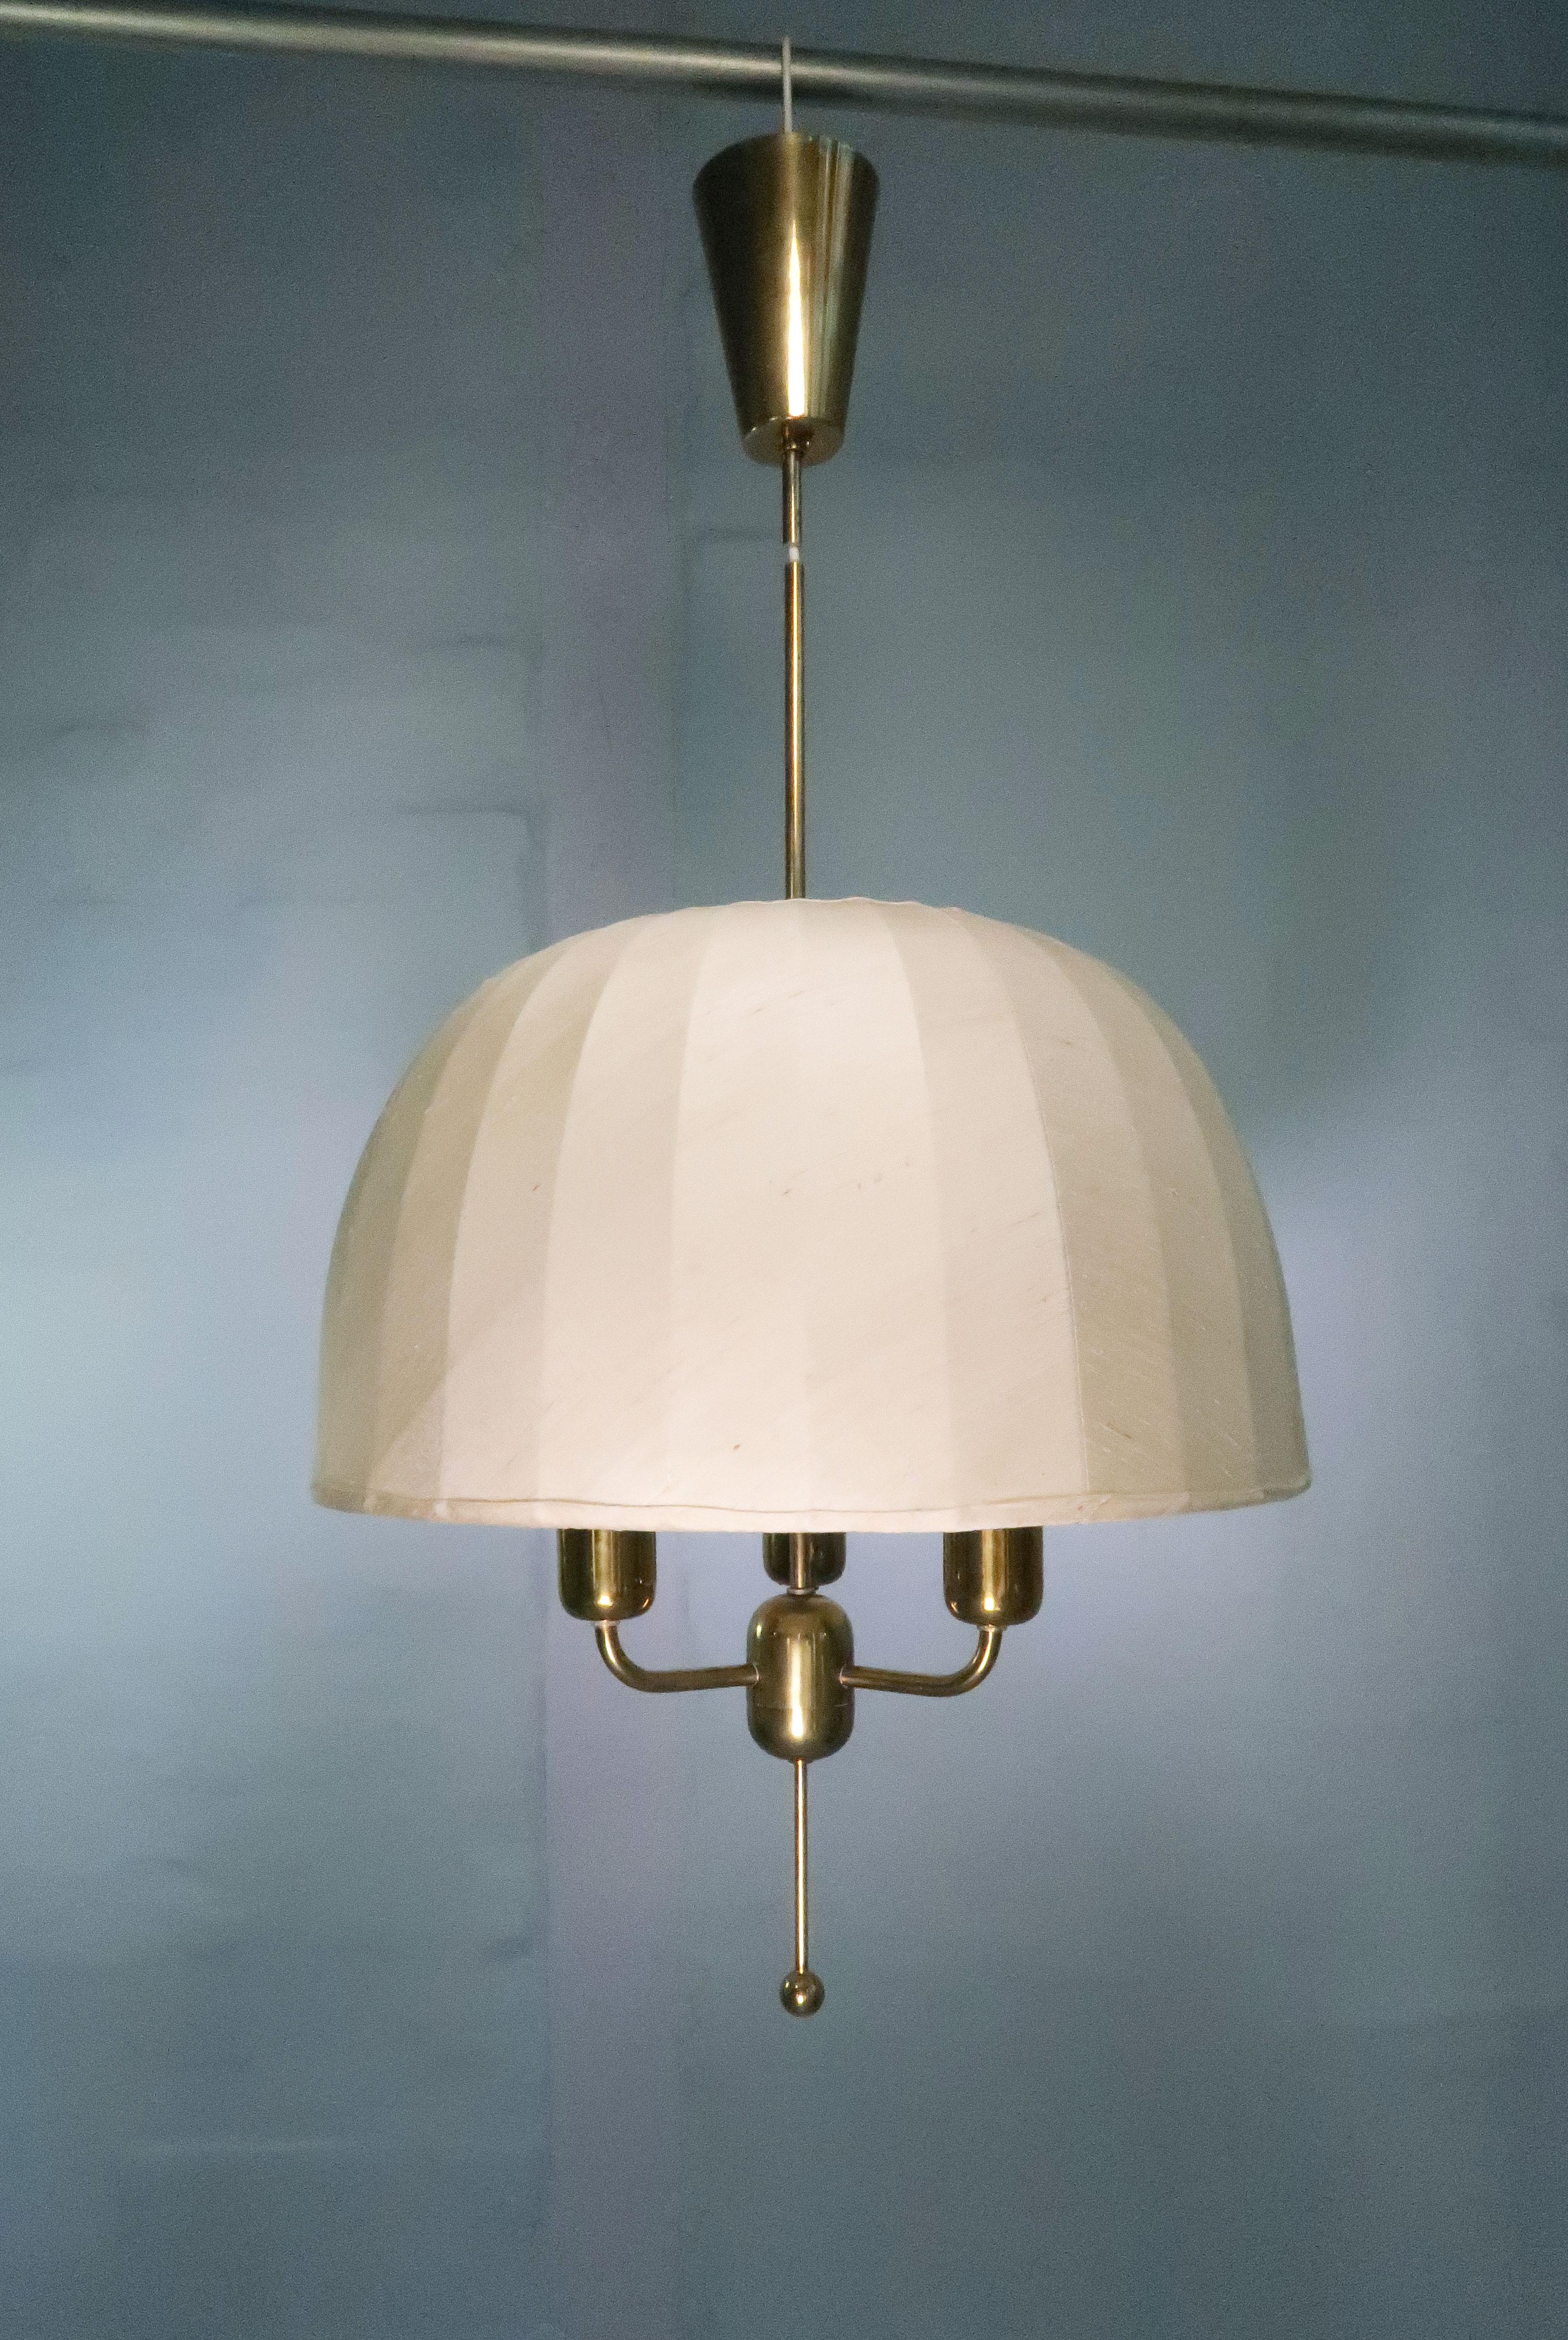 Large ceiling pendant designed by Hans Agne Jakobsson for AB Markaryd in 1963. Original cream/ivory white silk shade on white lacquered metal and brass mount. Original brass canopy and stem - height adjustable. Three bulbs. Label on